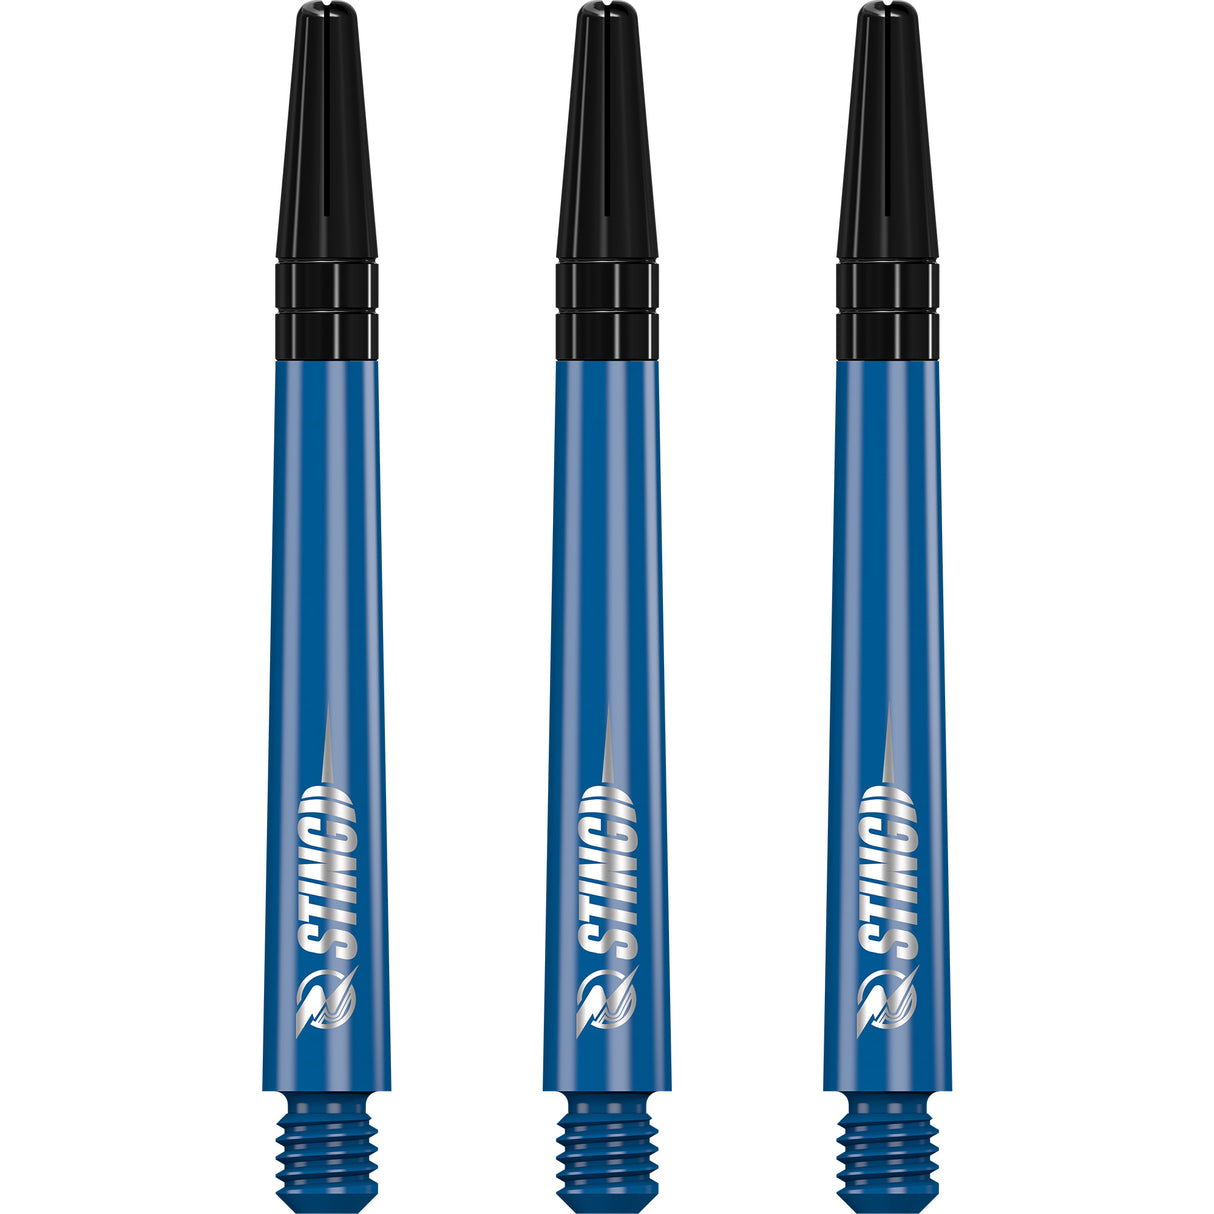 Ruthless Sting Dart Shafts - Polycarbonate - Solid Blue - Black Top